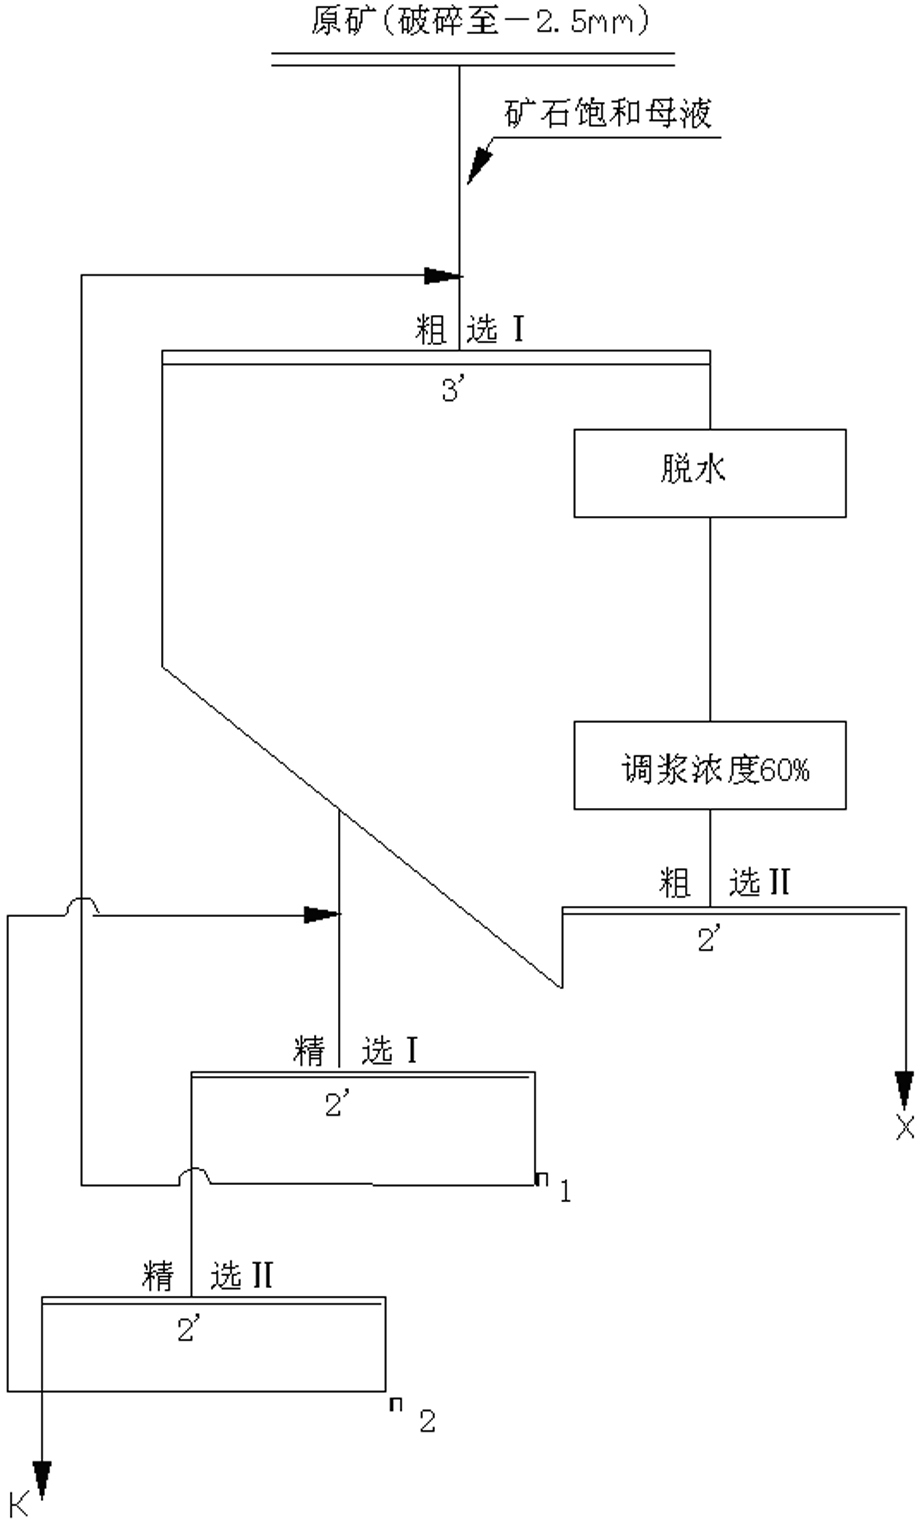 Process for extracting potassium chloride from native sylvite ore